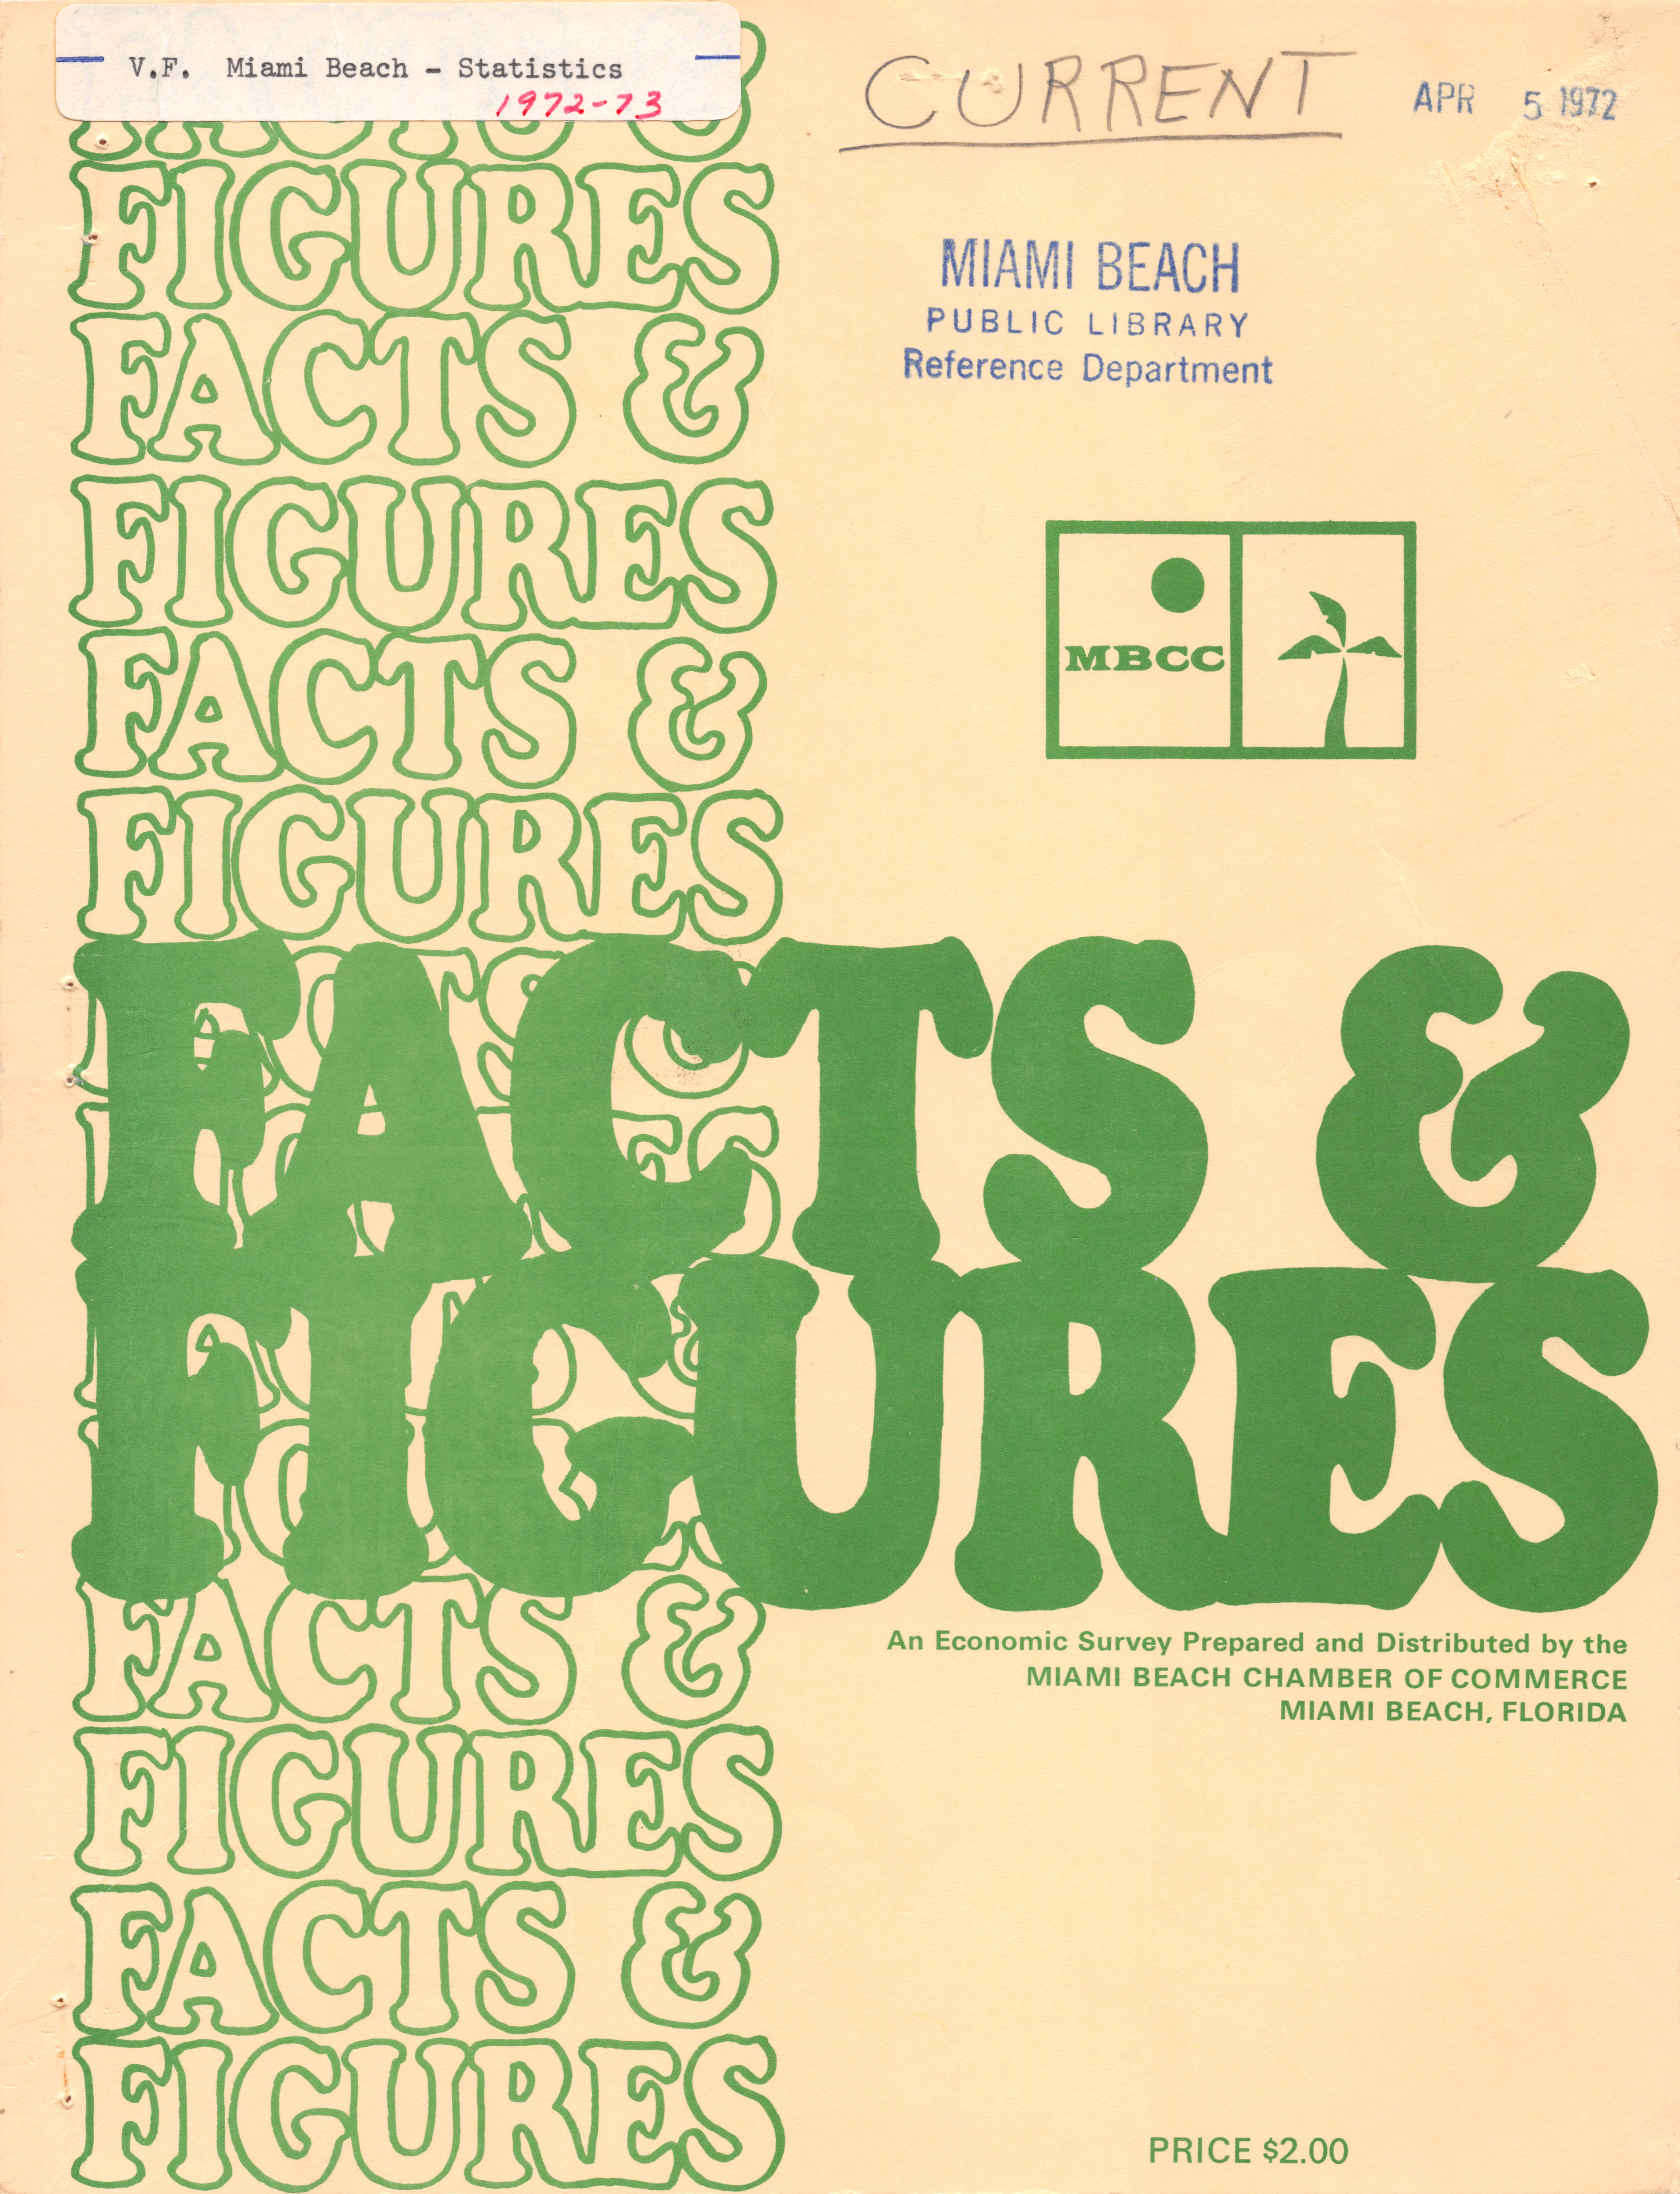 Facts & Figures: An Economic Survey 1972, 1973 - Cover: Facts & Figures: An Economic Survey Prepared and Distributed by the Miami Beach Chamber of Commerce Miami Beach, Florida